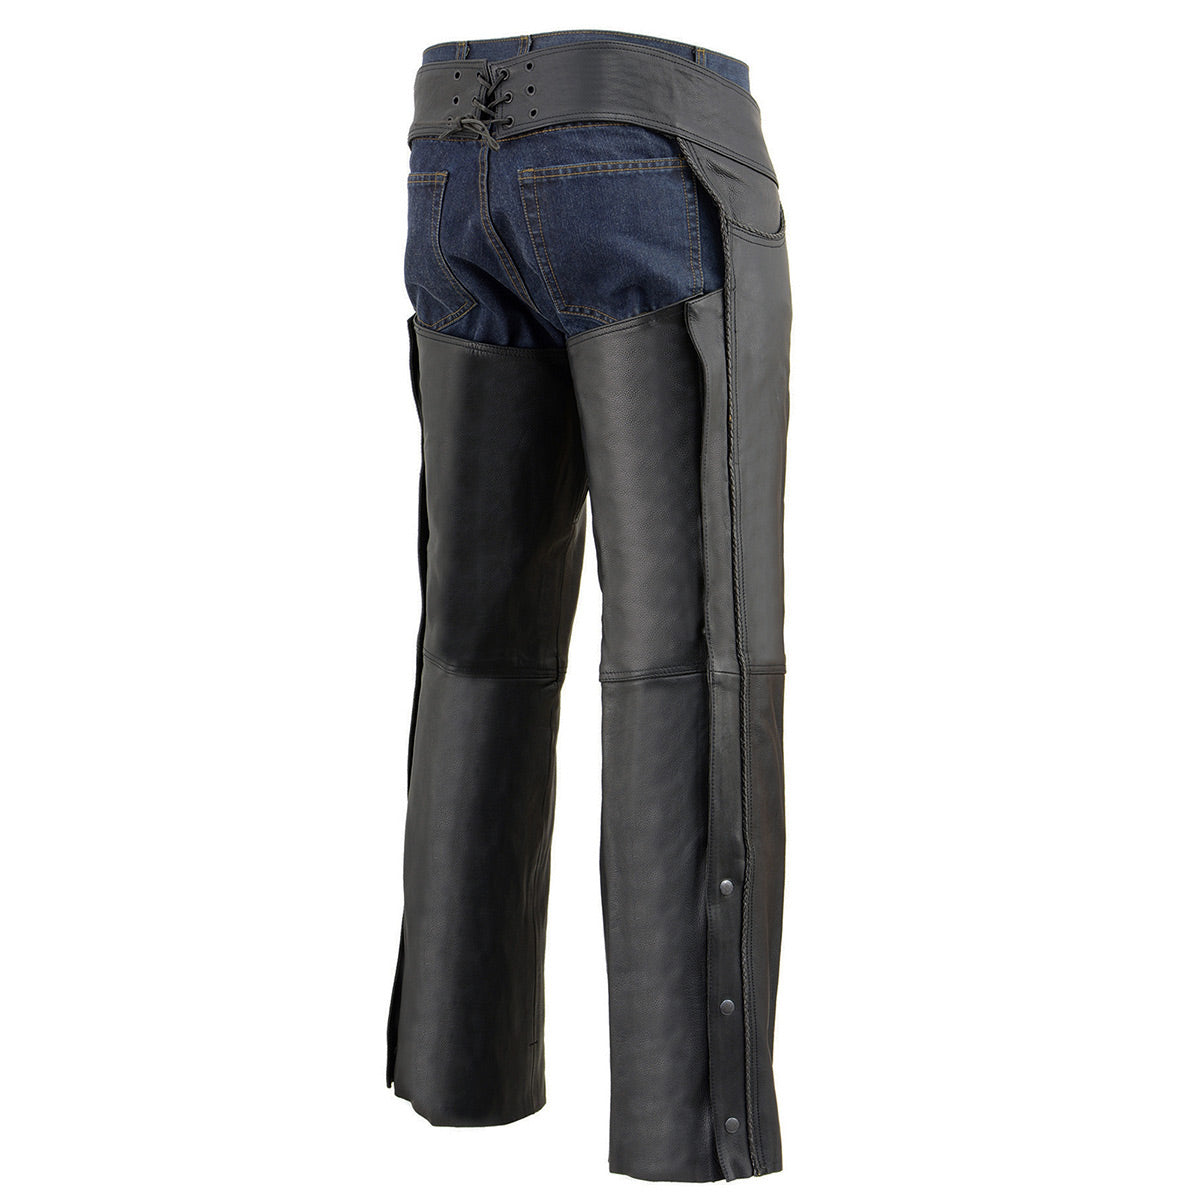 Milwaukee Leather Chaps for Men's Black Thin Braided Naked Soft Leather - Jean Style Pocket Motorcycle Chap- ML1125